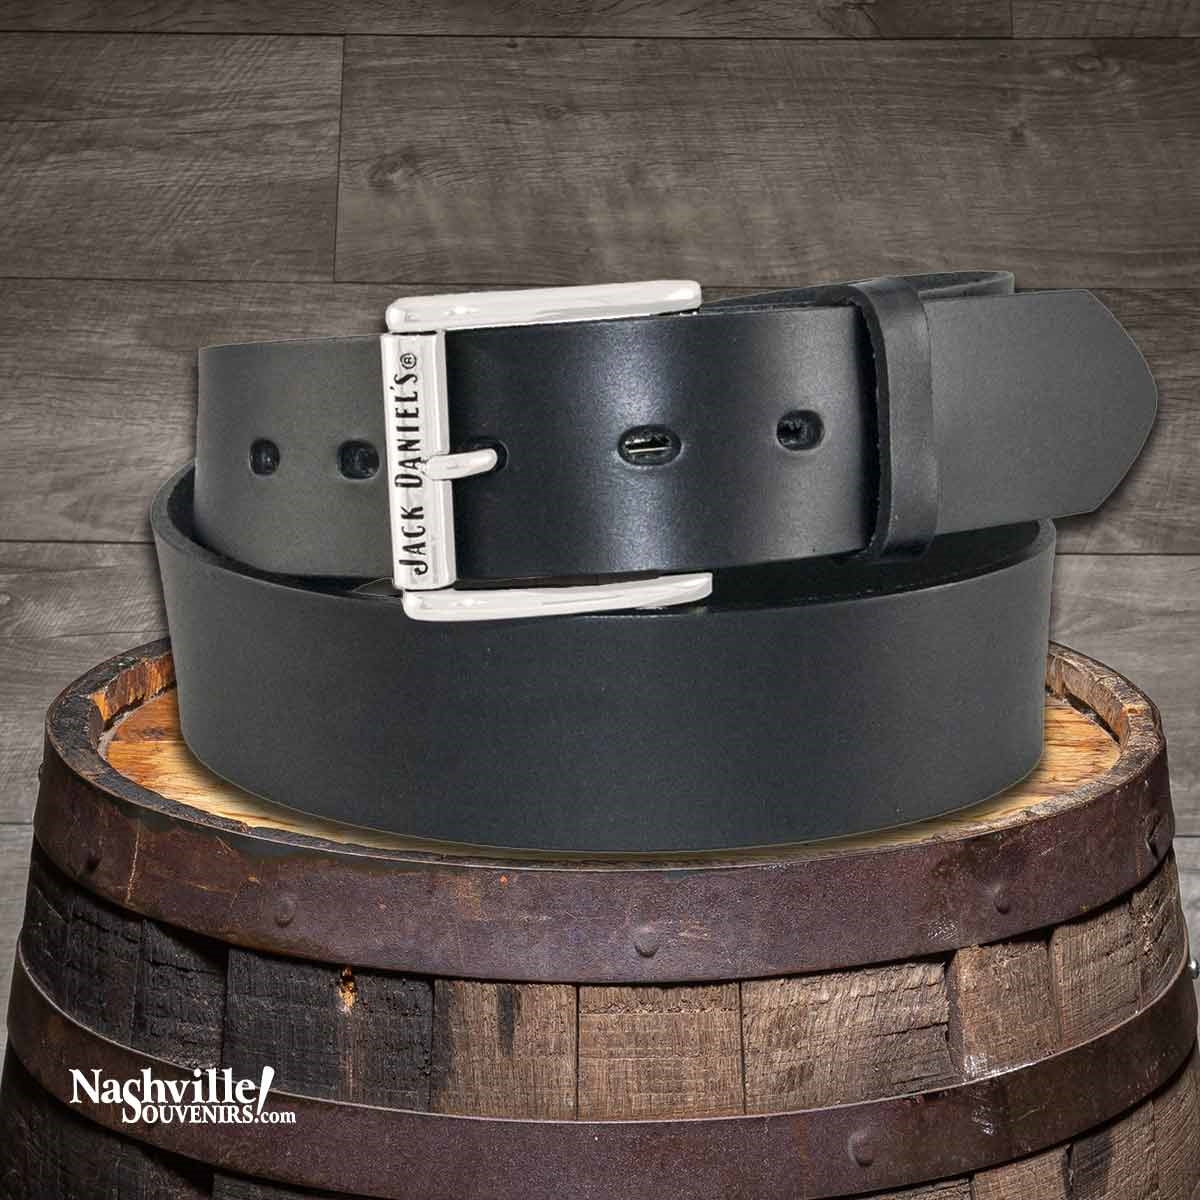 Officially licensed Jack Daniels Belt with silver plated roller buckle in black full-grain leather. Get yours today with FREE SHIPPING on all US orders over $75!